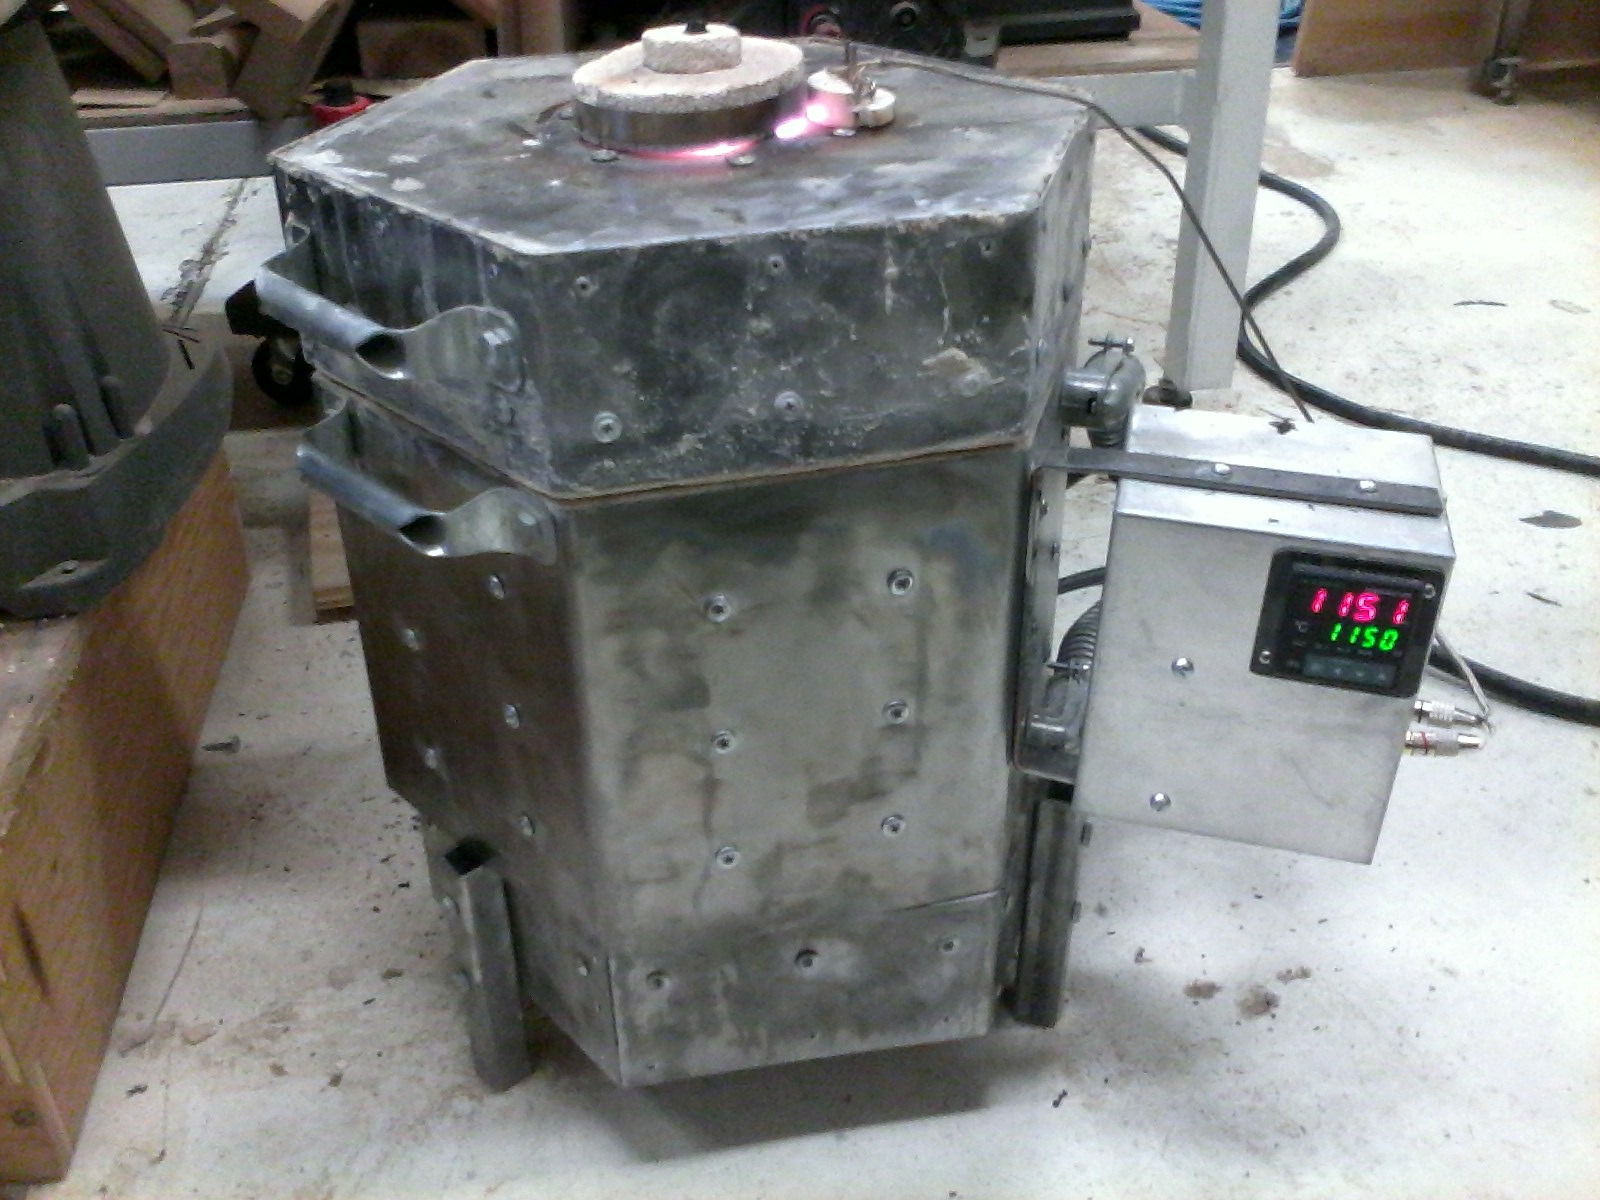 My new computer controlled electric furnace